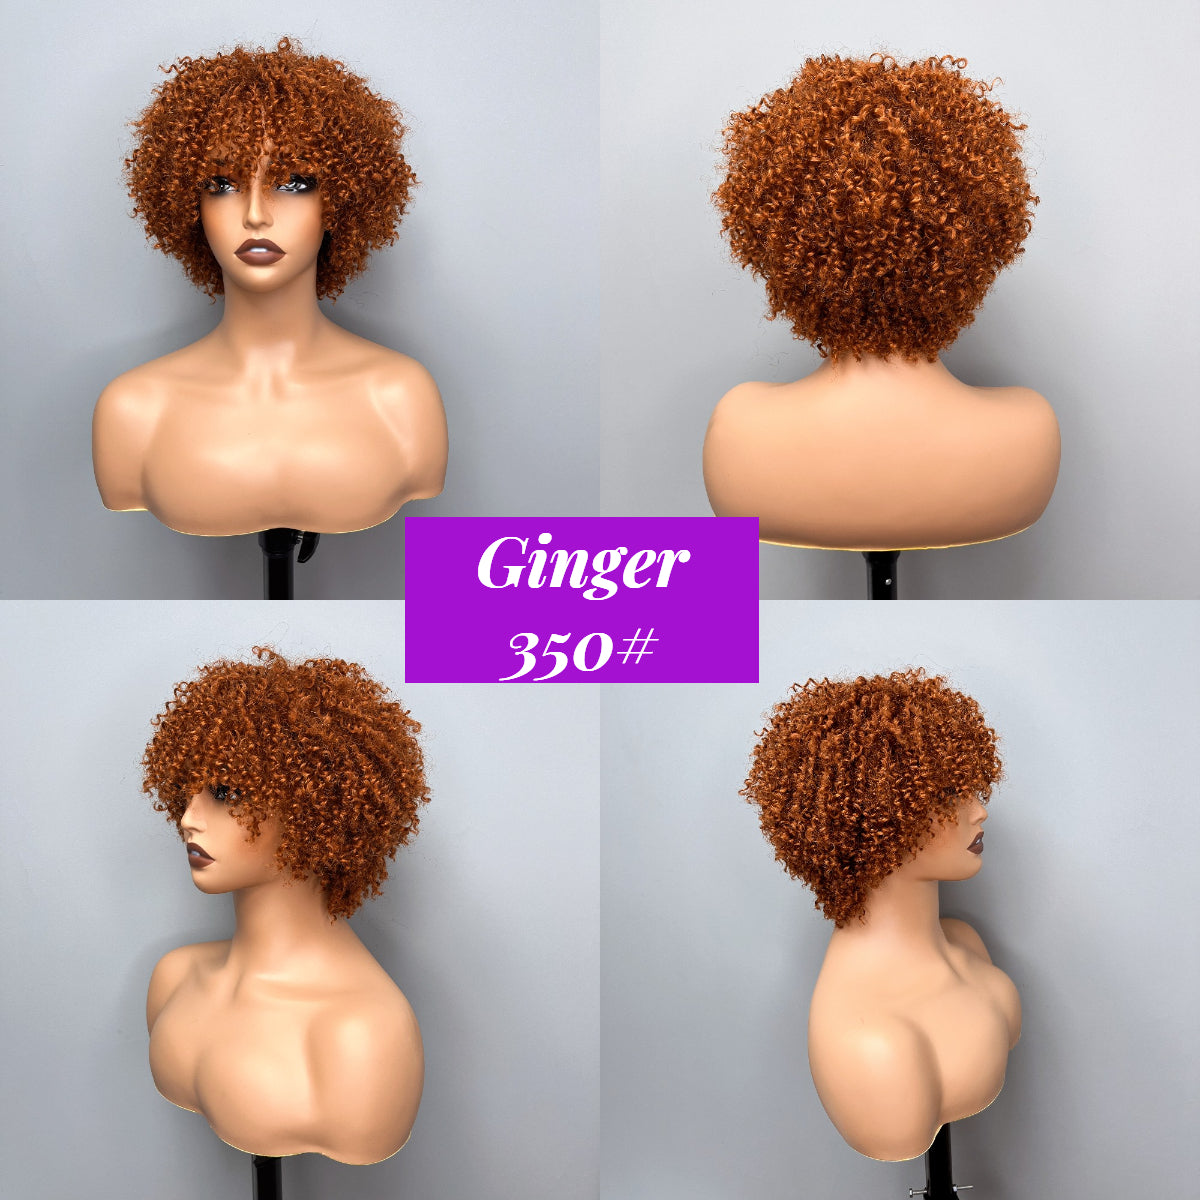 New 6 Inch Afro Kinky Curly Bob Wig With Bangs  Curly Pixie Cut Glueless Wig Machine Human Hair Wigs For Black Women No Code Needed  -Amanda Hair